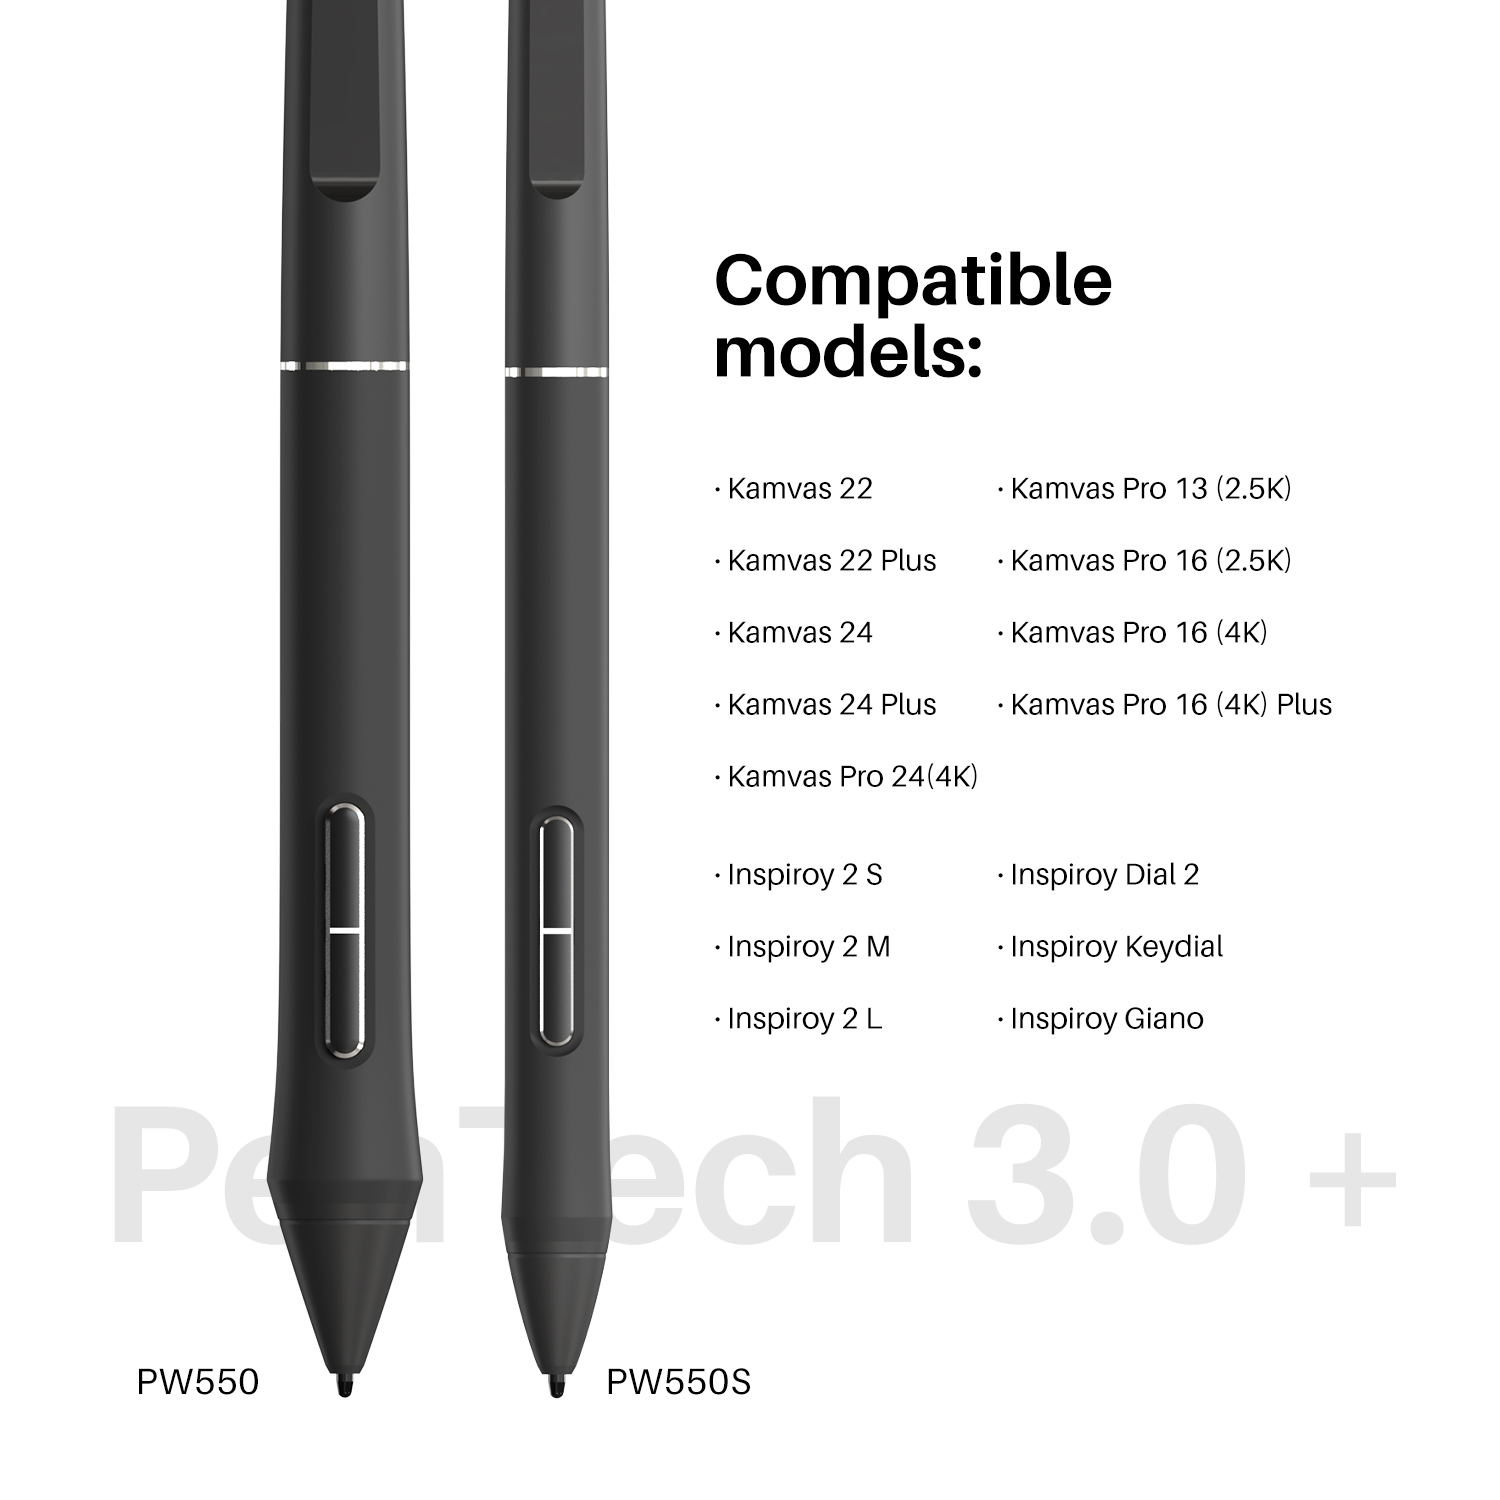 Introducing Huion PenTech 3.0+ and PW550/PW550S | Huion Official 